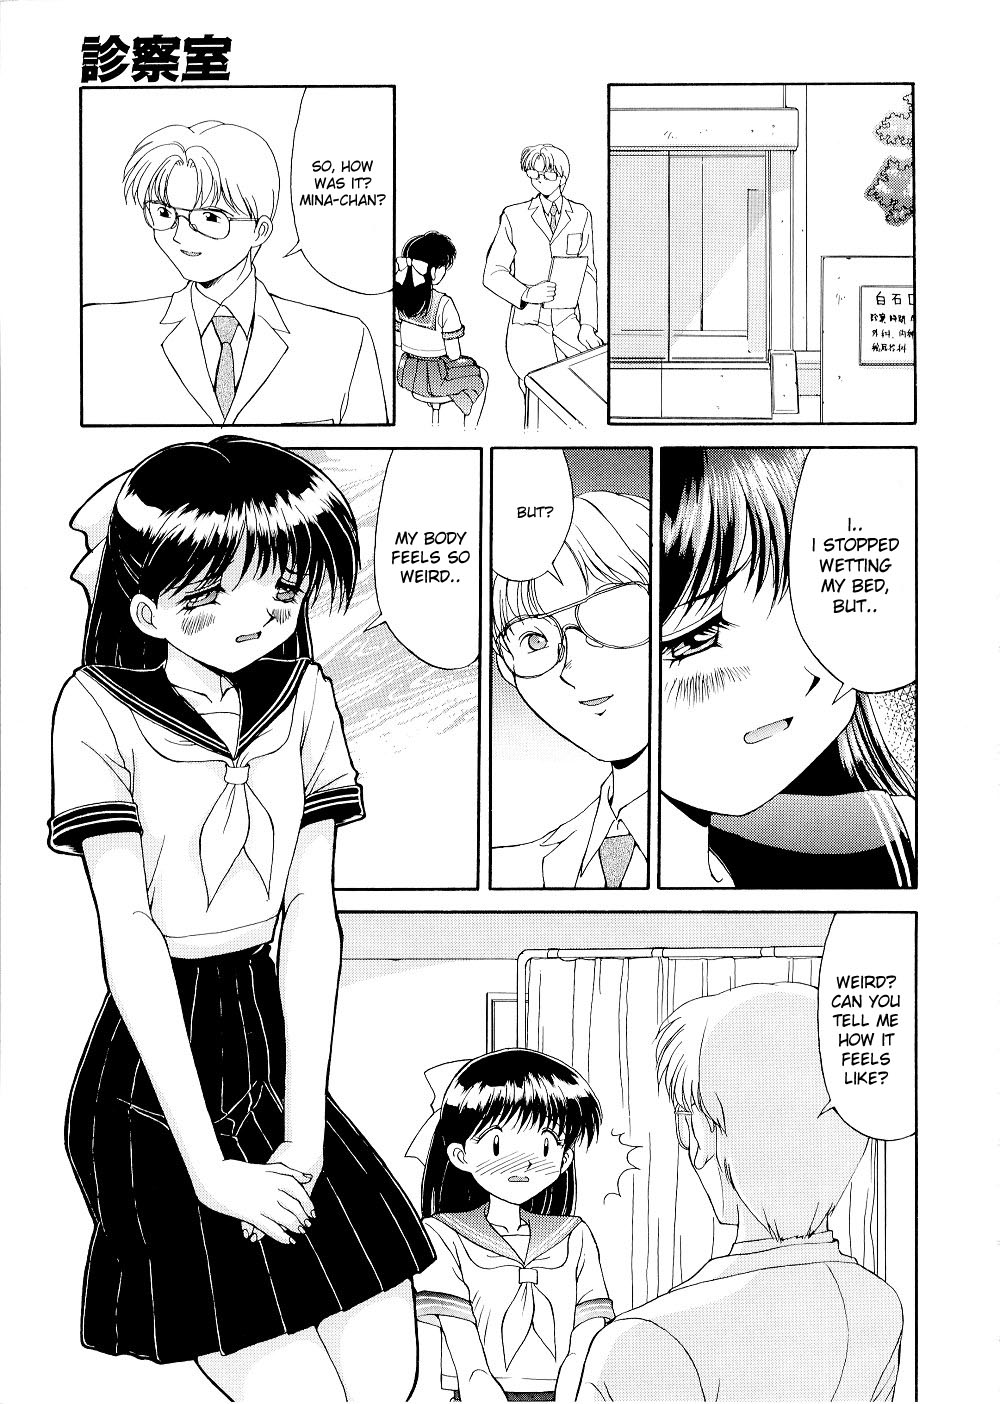 [MIZU YOUKAN] Complex - The Examining Room [ENG] page 17 full